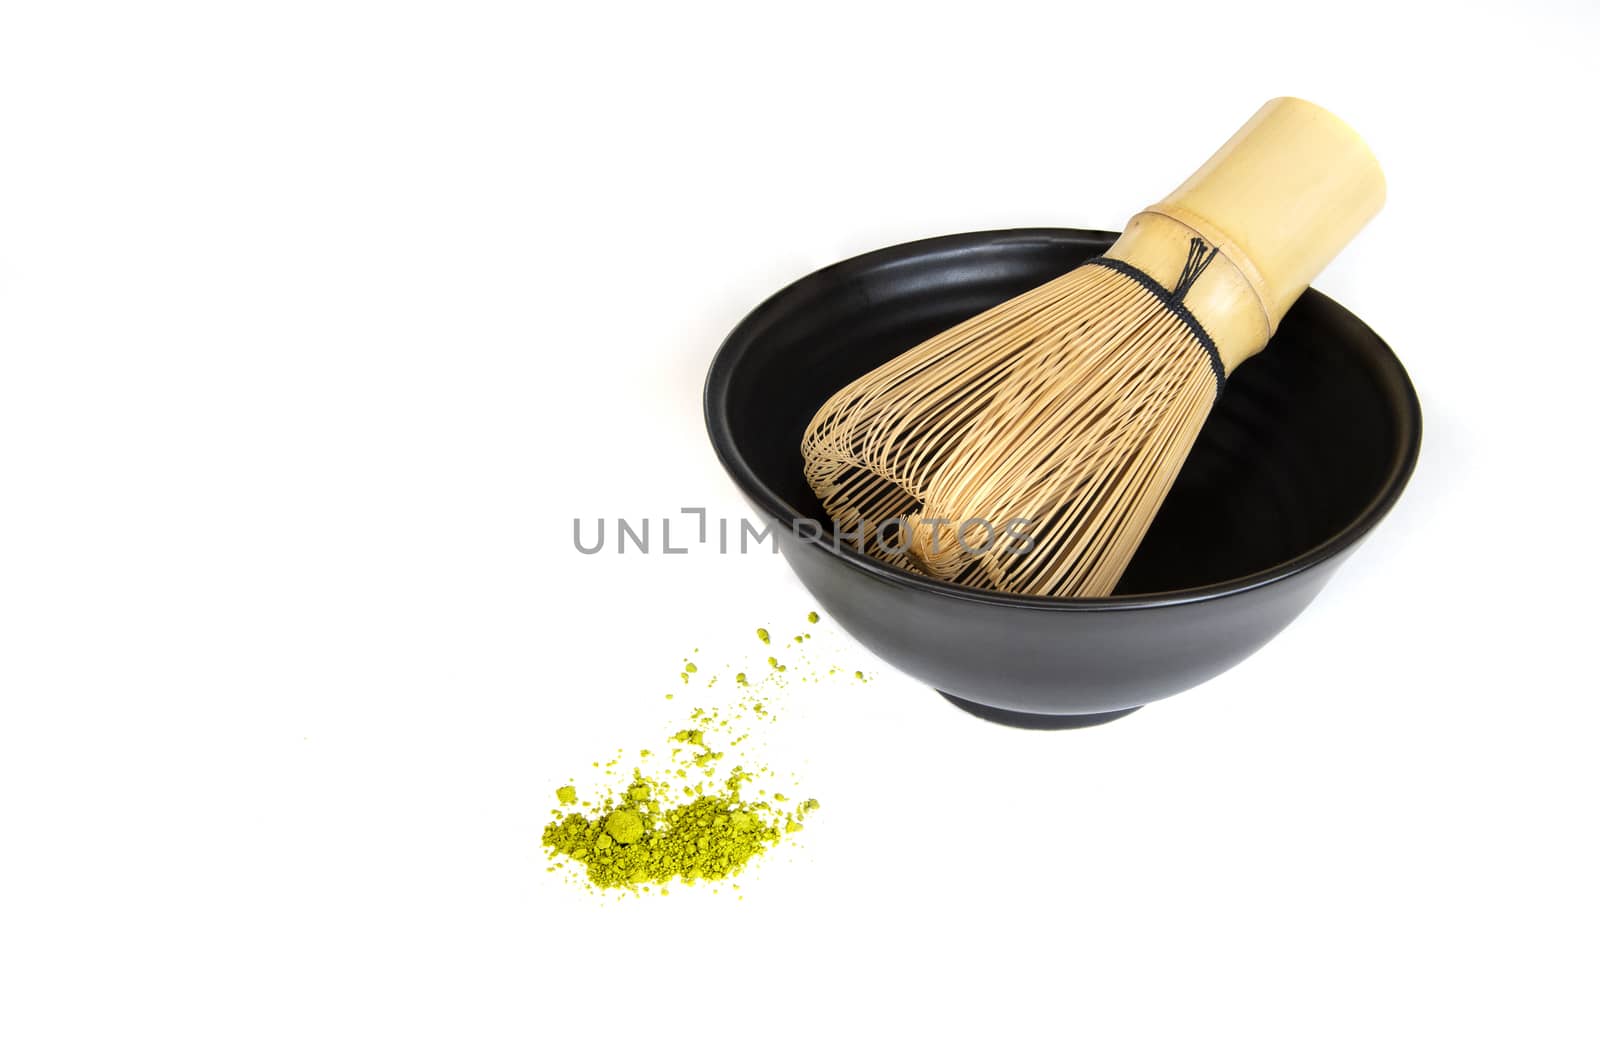 Japanese green tea powder stirrer and a black ceramic cup, isolated on white background.